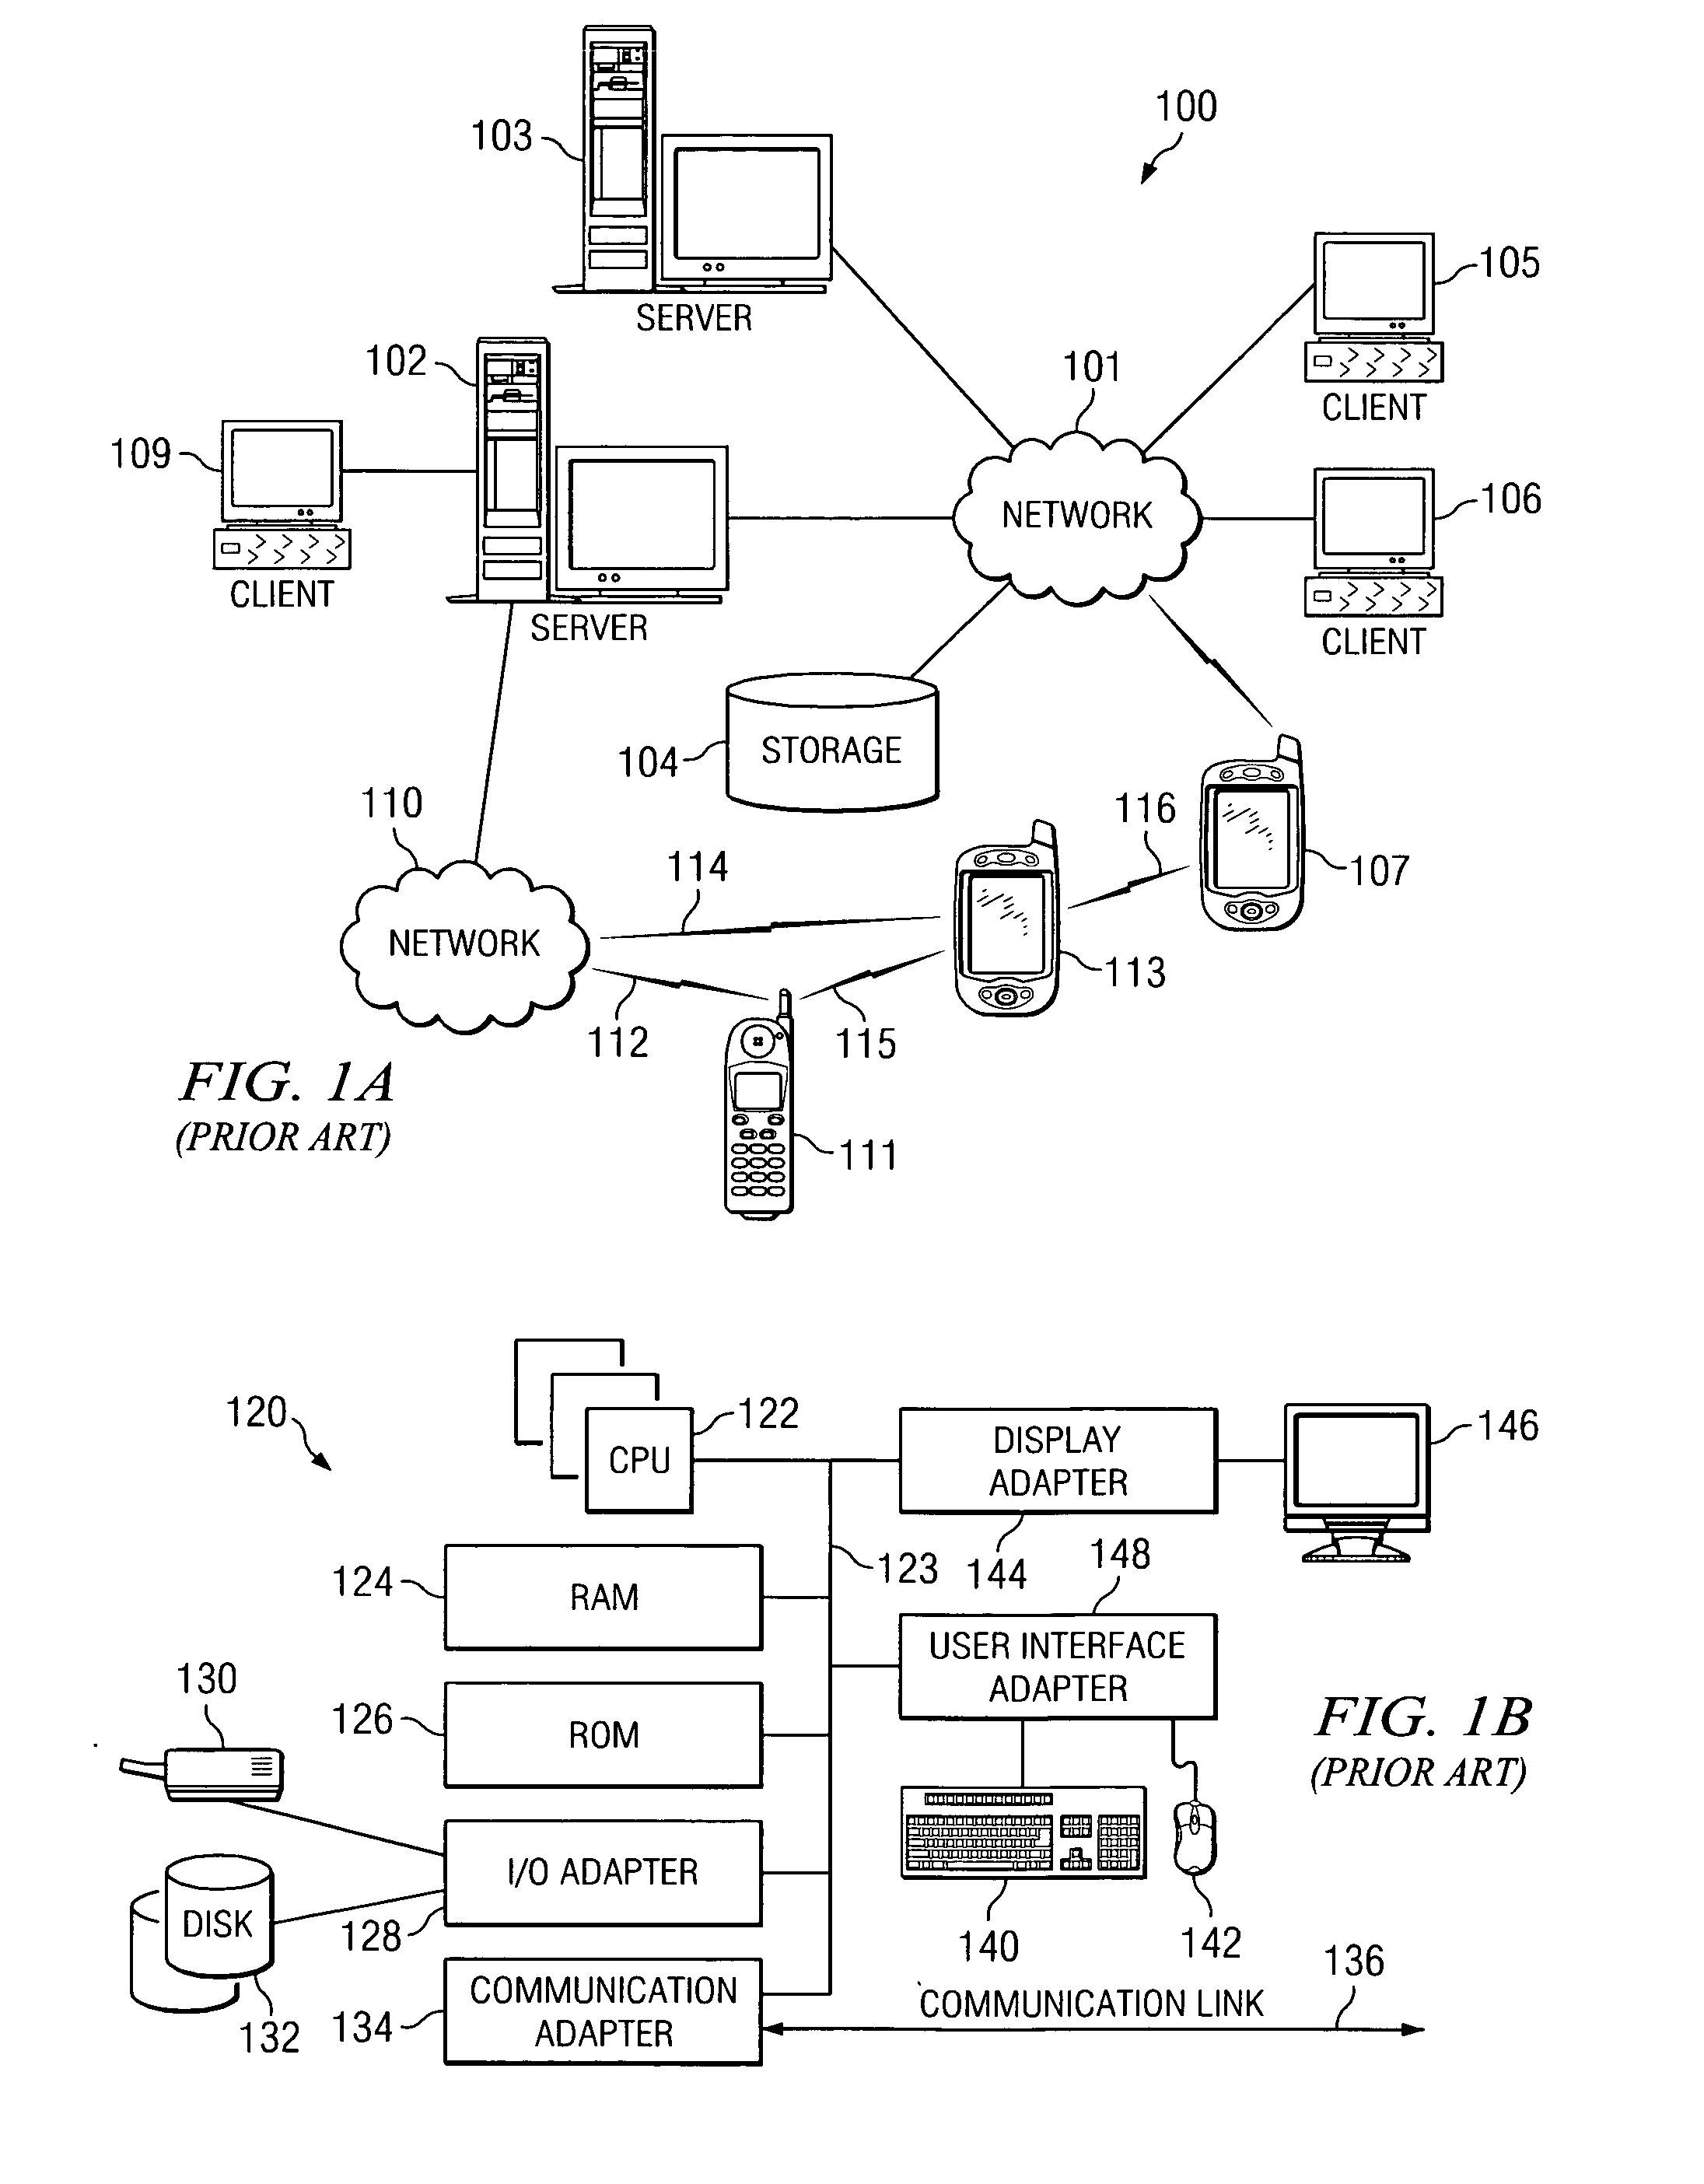 Method, apparatus, and product for providing a backup hardware trusted platform module in a hypervisor environment